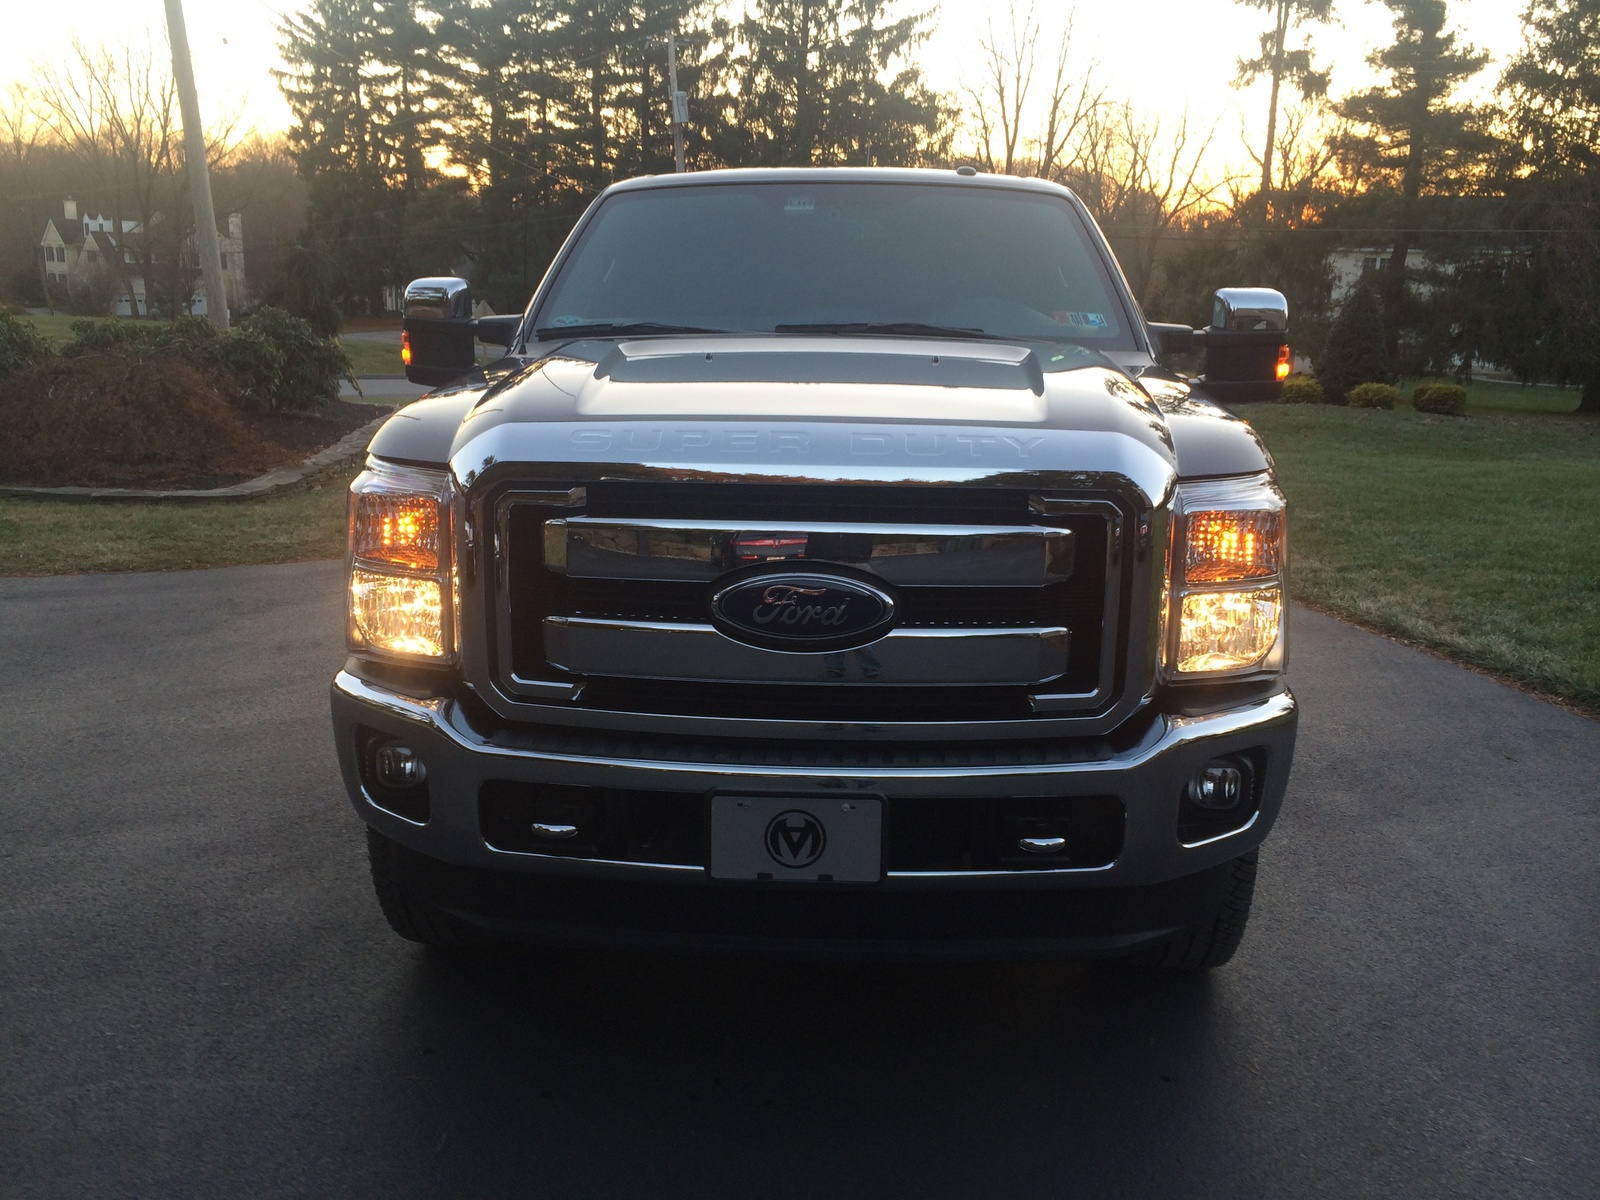 2013 Ford f-250 platinum review #8